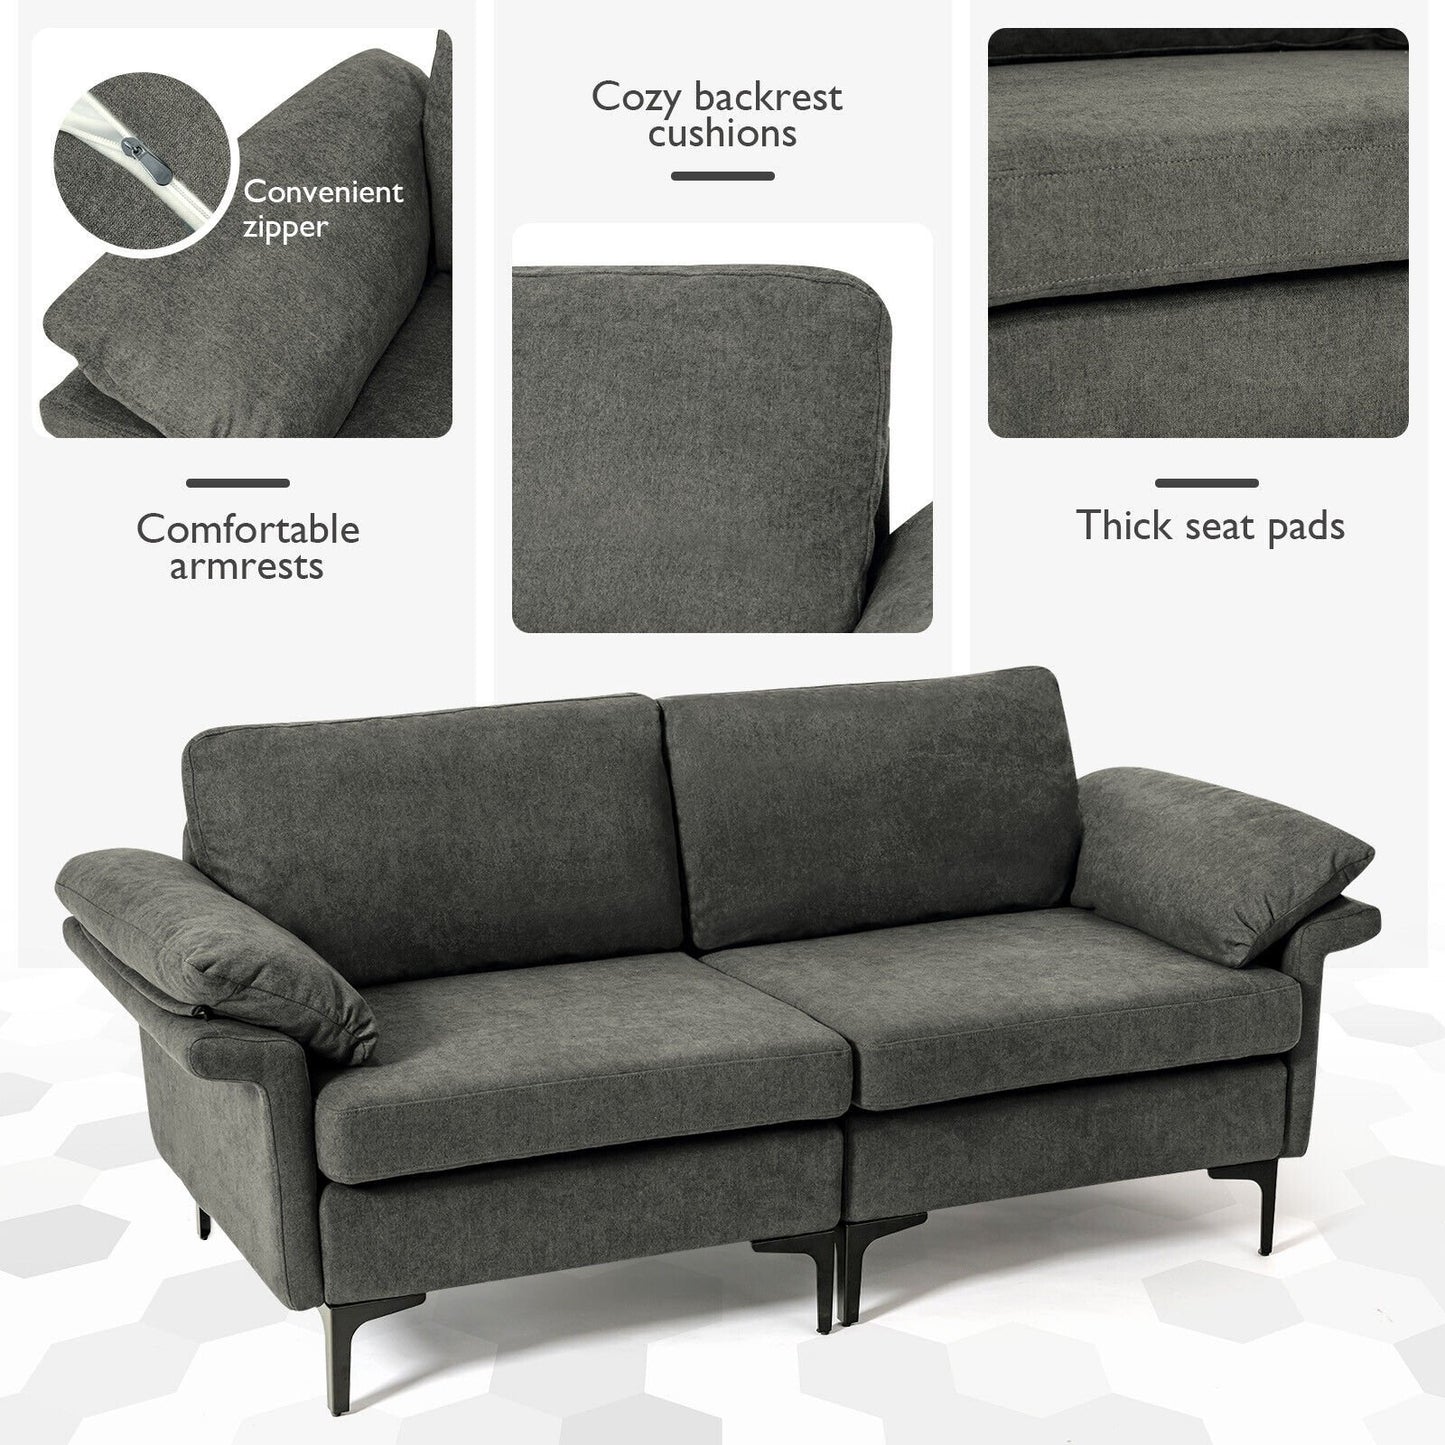 Modern Fabric Loveseat Sofa for with Metal Legs and Armrest Pillows, Gray